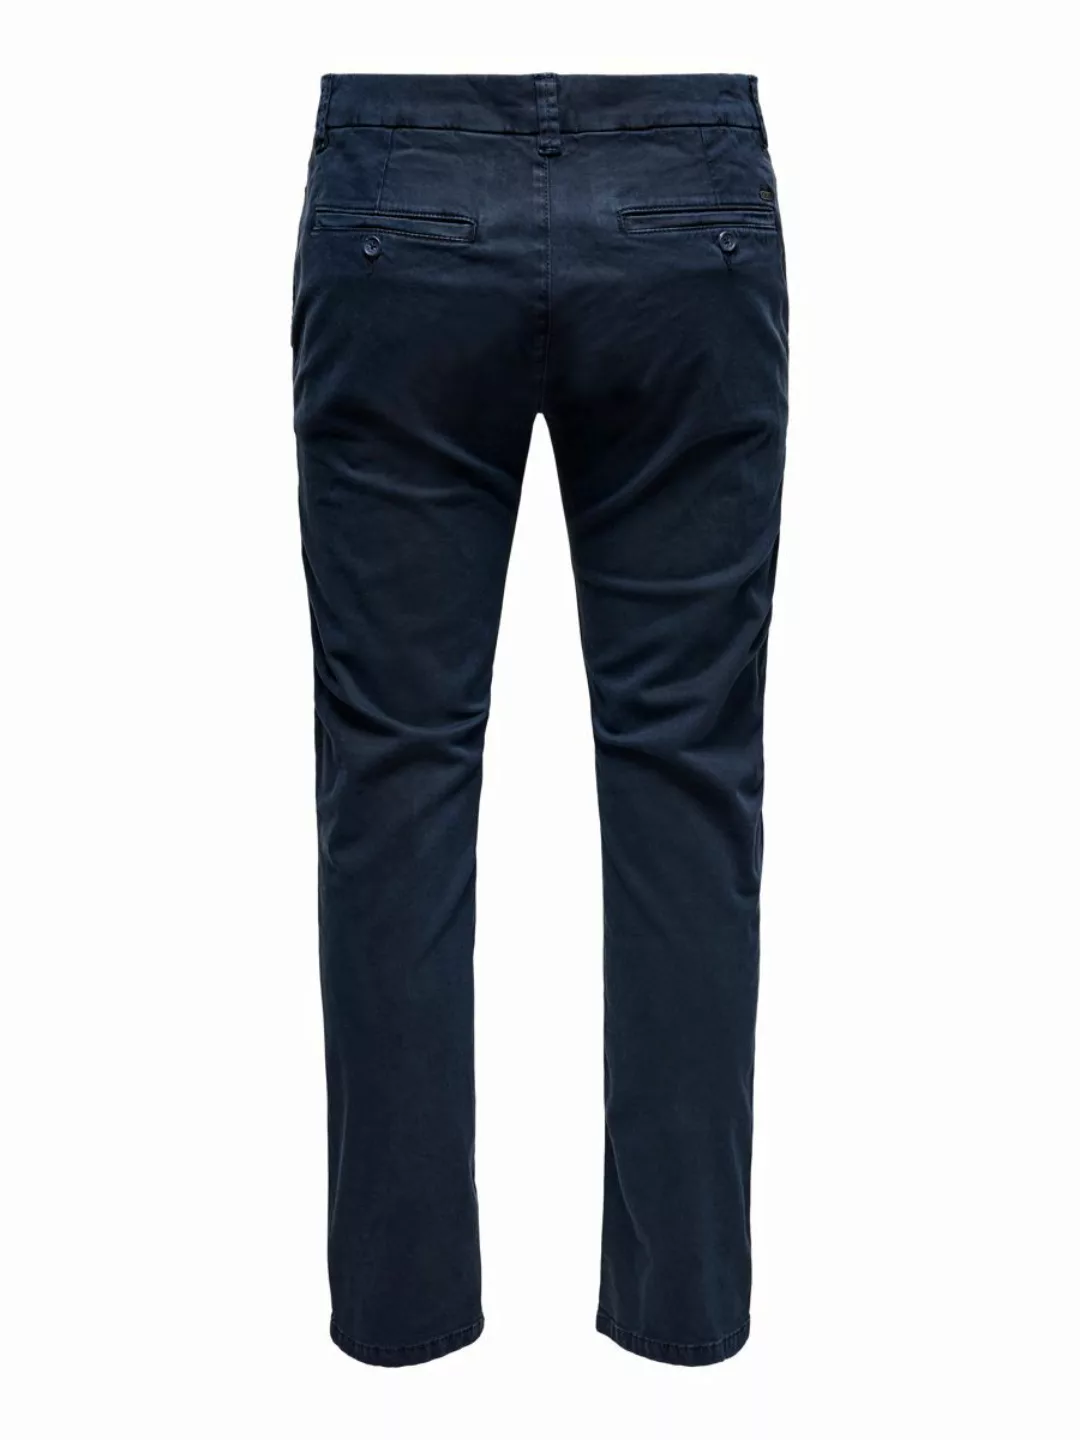 ONLY & SONS Chinohose Slim Fit Chino Hose Basic Pants ONSPETE Baumwolle Twi günstig online kaufen